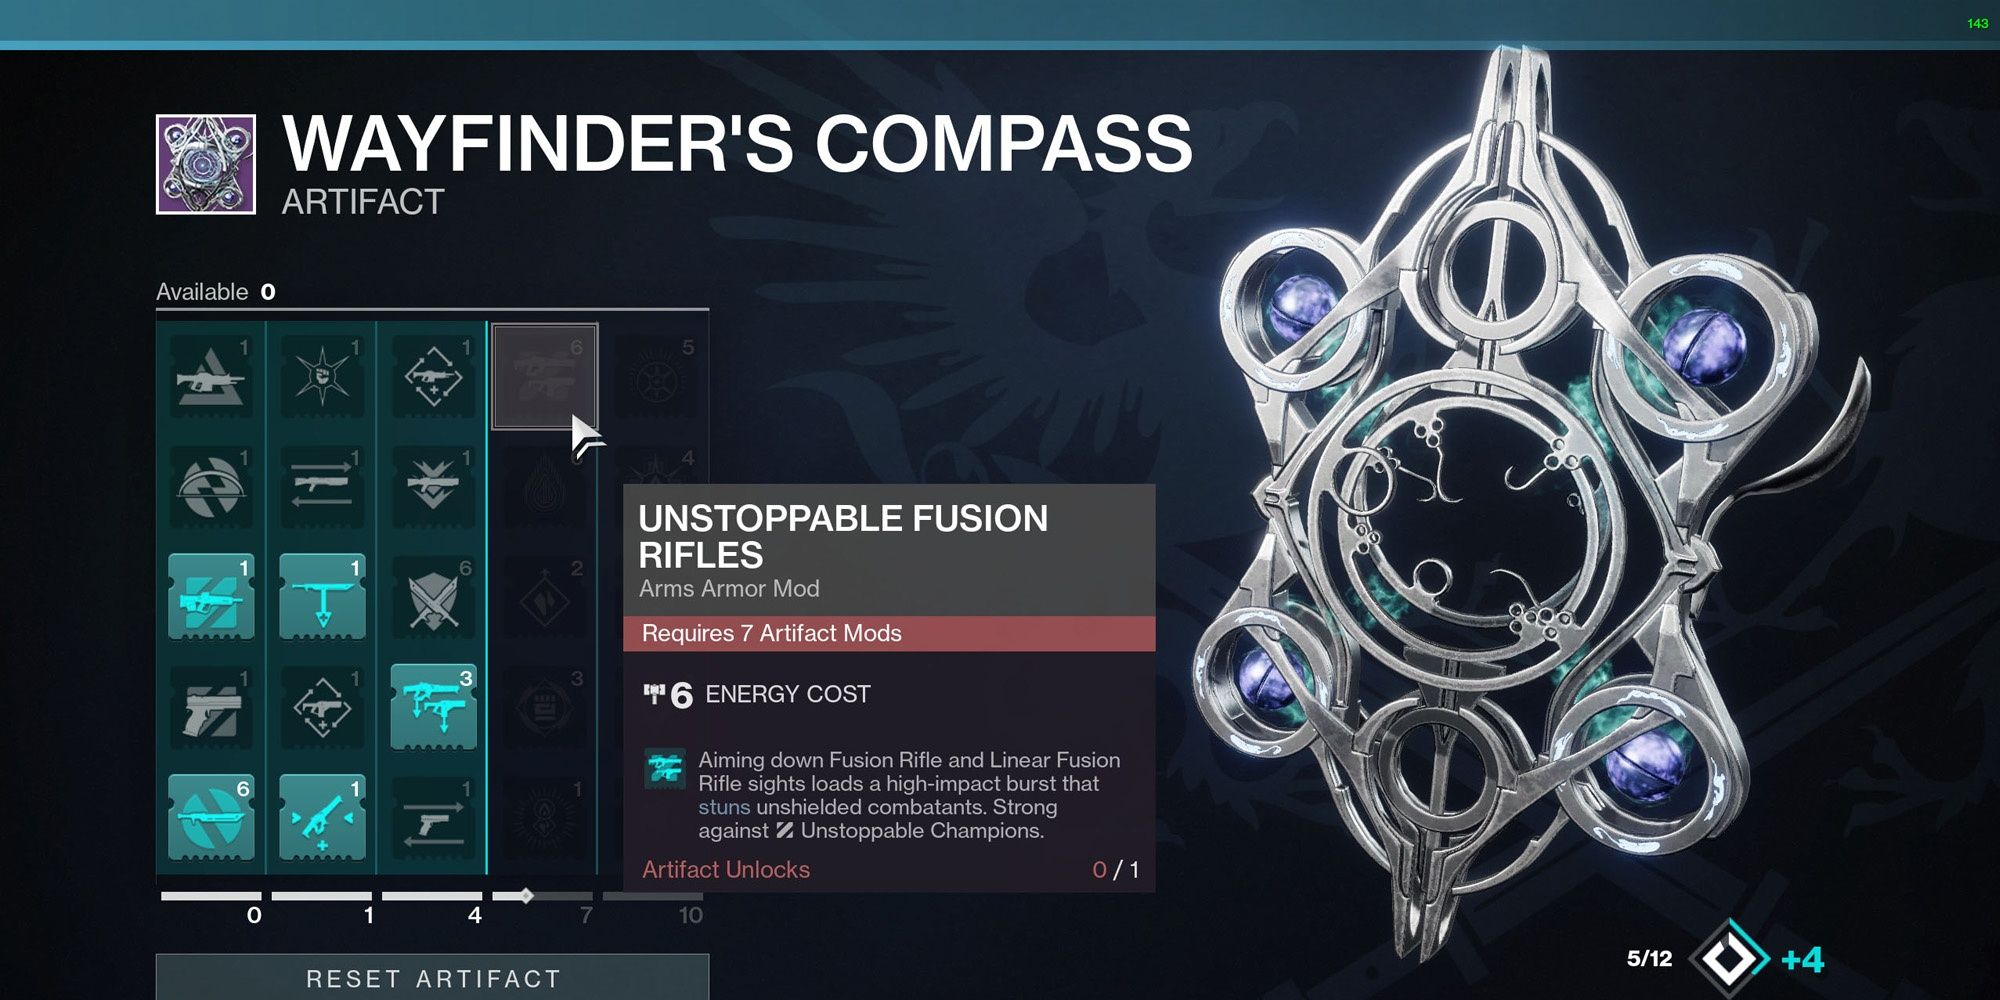 Unstoppable Fusion Artifact Mod displayed in menu Wayfinder's Compass Destiny 2 